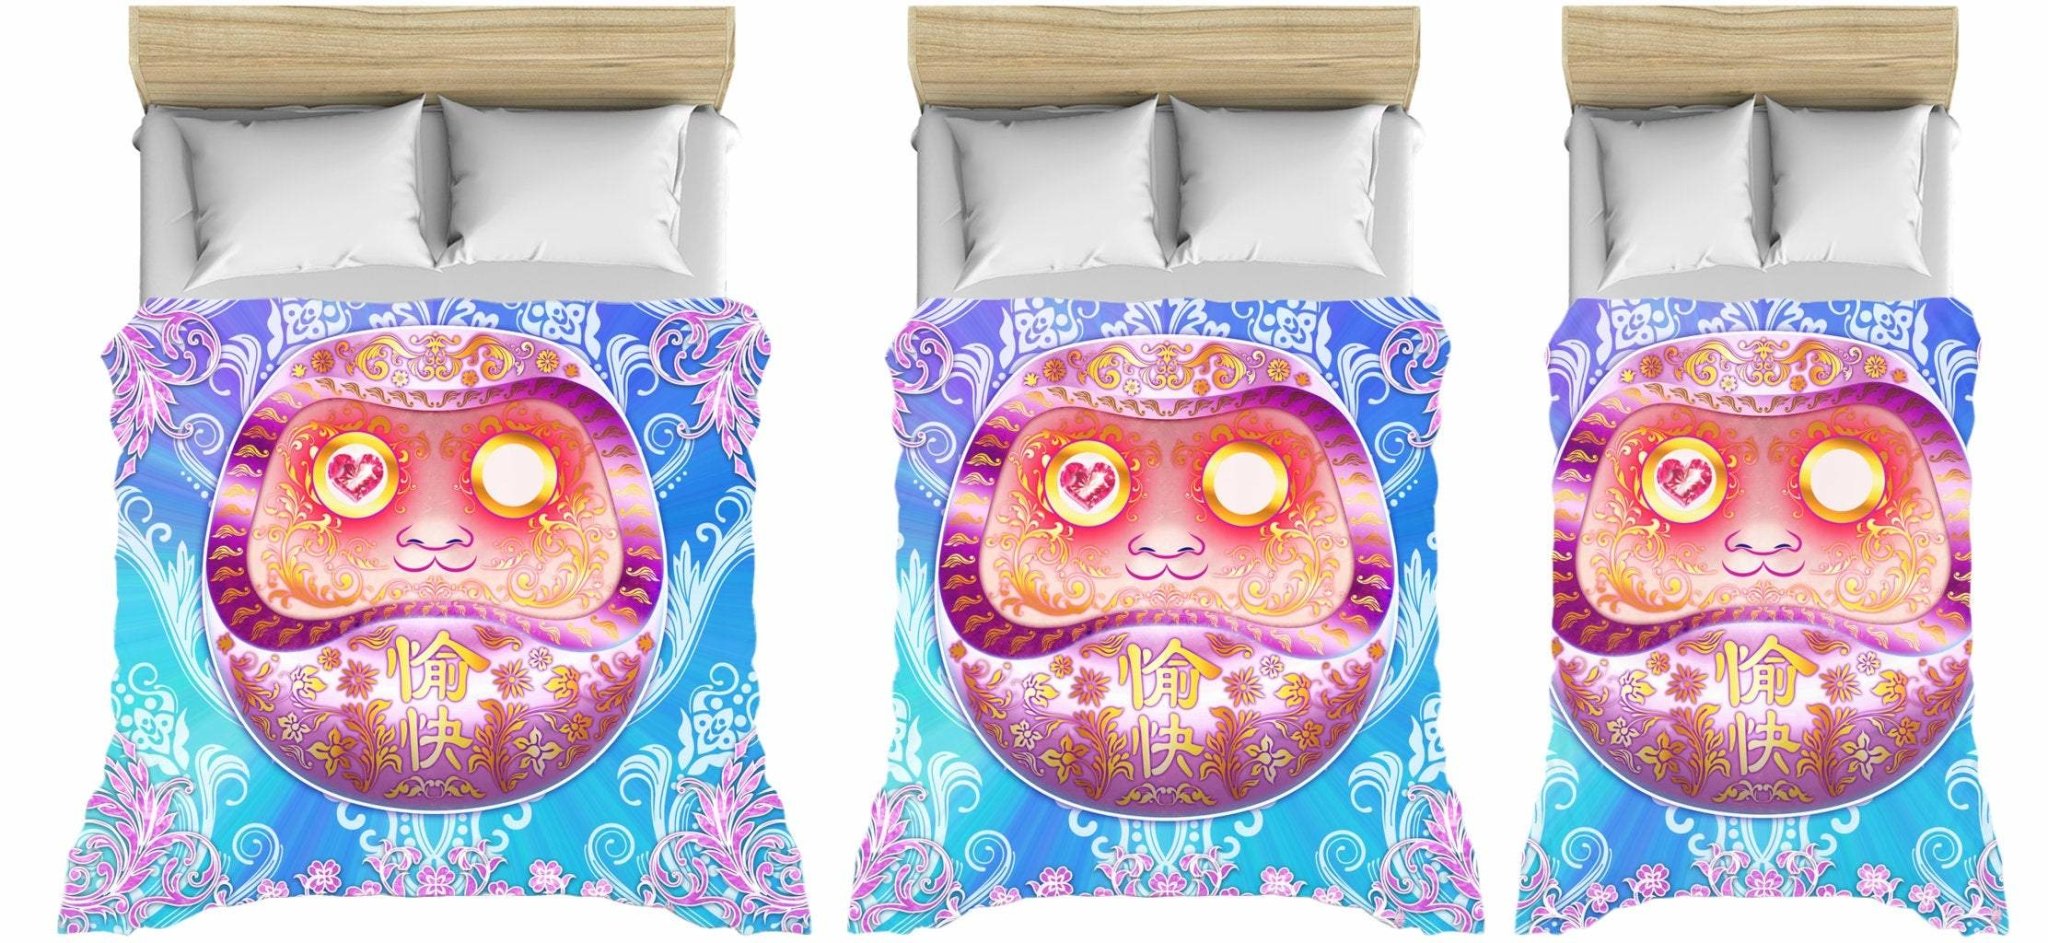 Kawaii Bedding Set, Comforter and Duvet, Aesthetic Bed Cover, Kawaii Gamer Bedroom Decor, King, Queen and Twin Size - Pastel Daruma - Abysm Internal